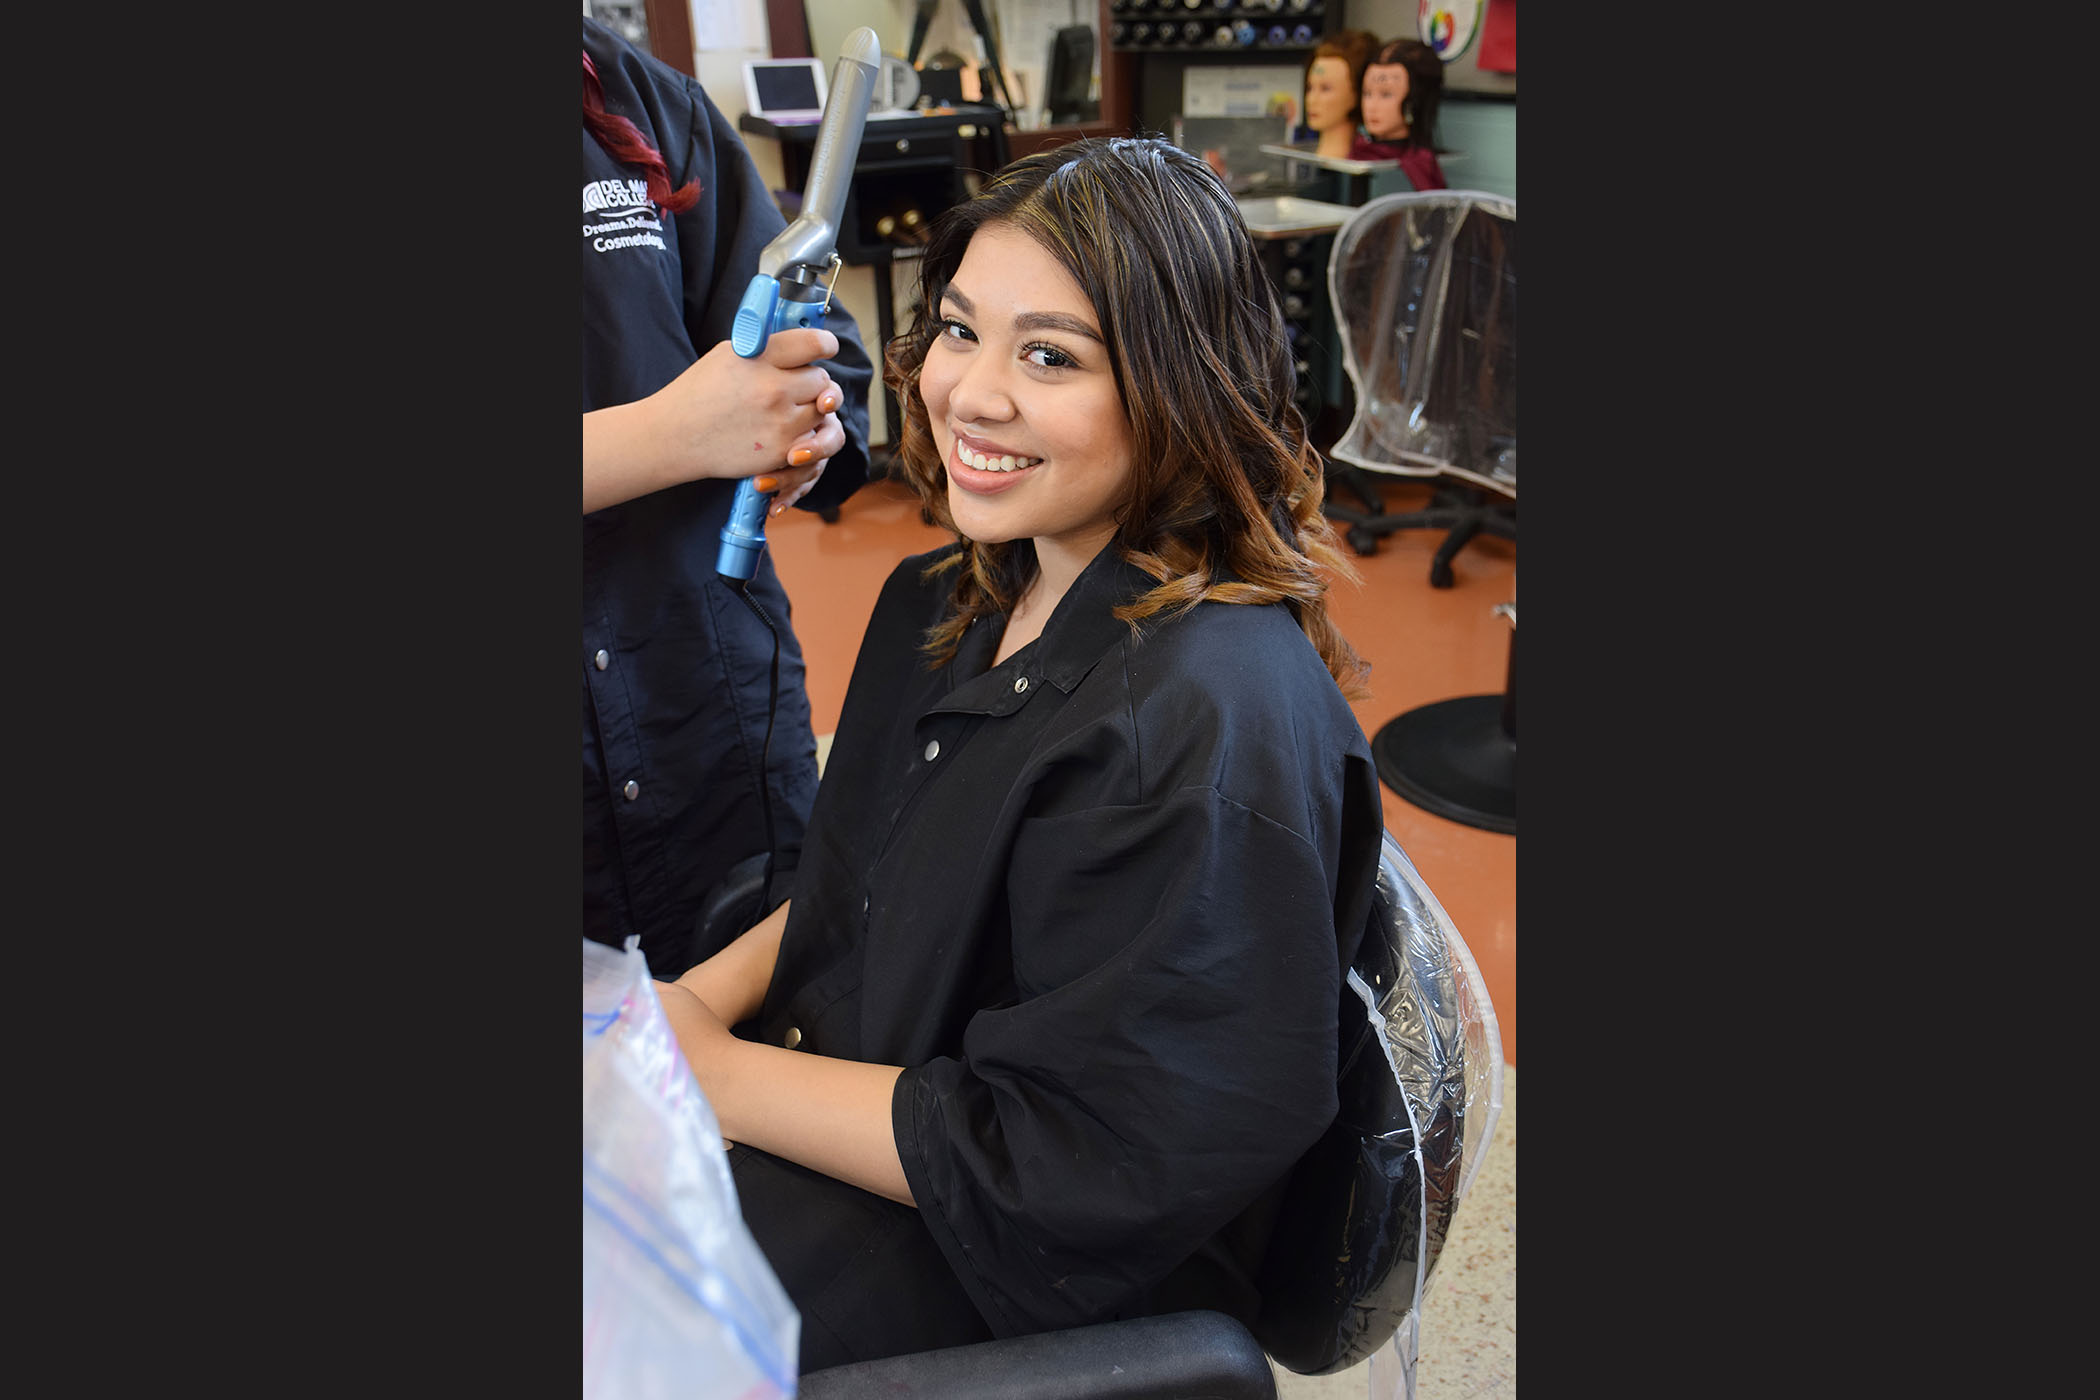 A student sits in a salon chair